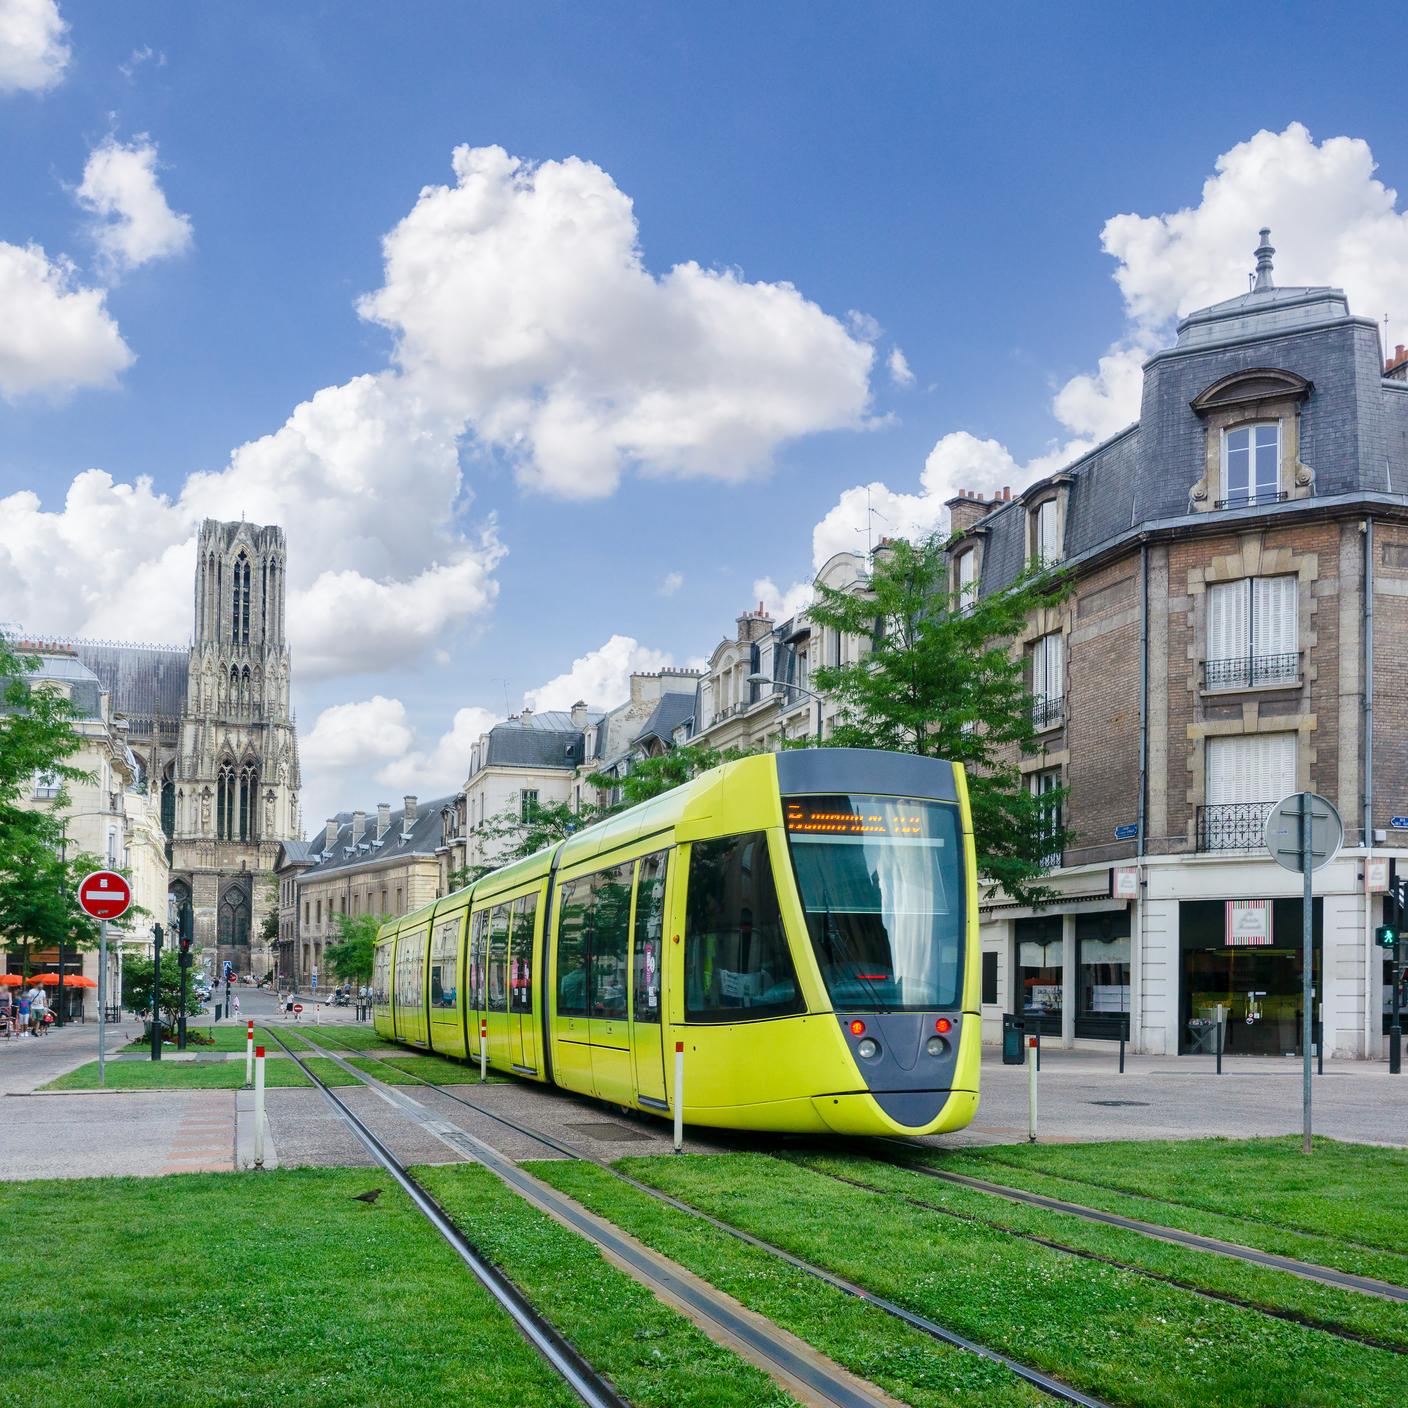 Trams run thru the streets and green city landscape of Reims, France